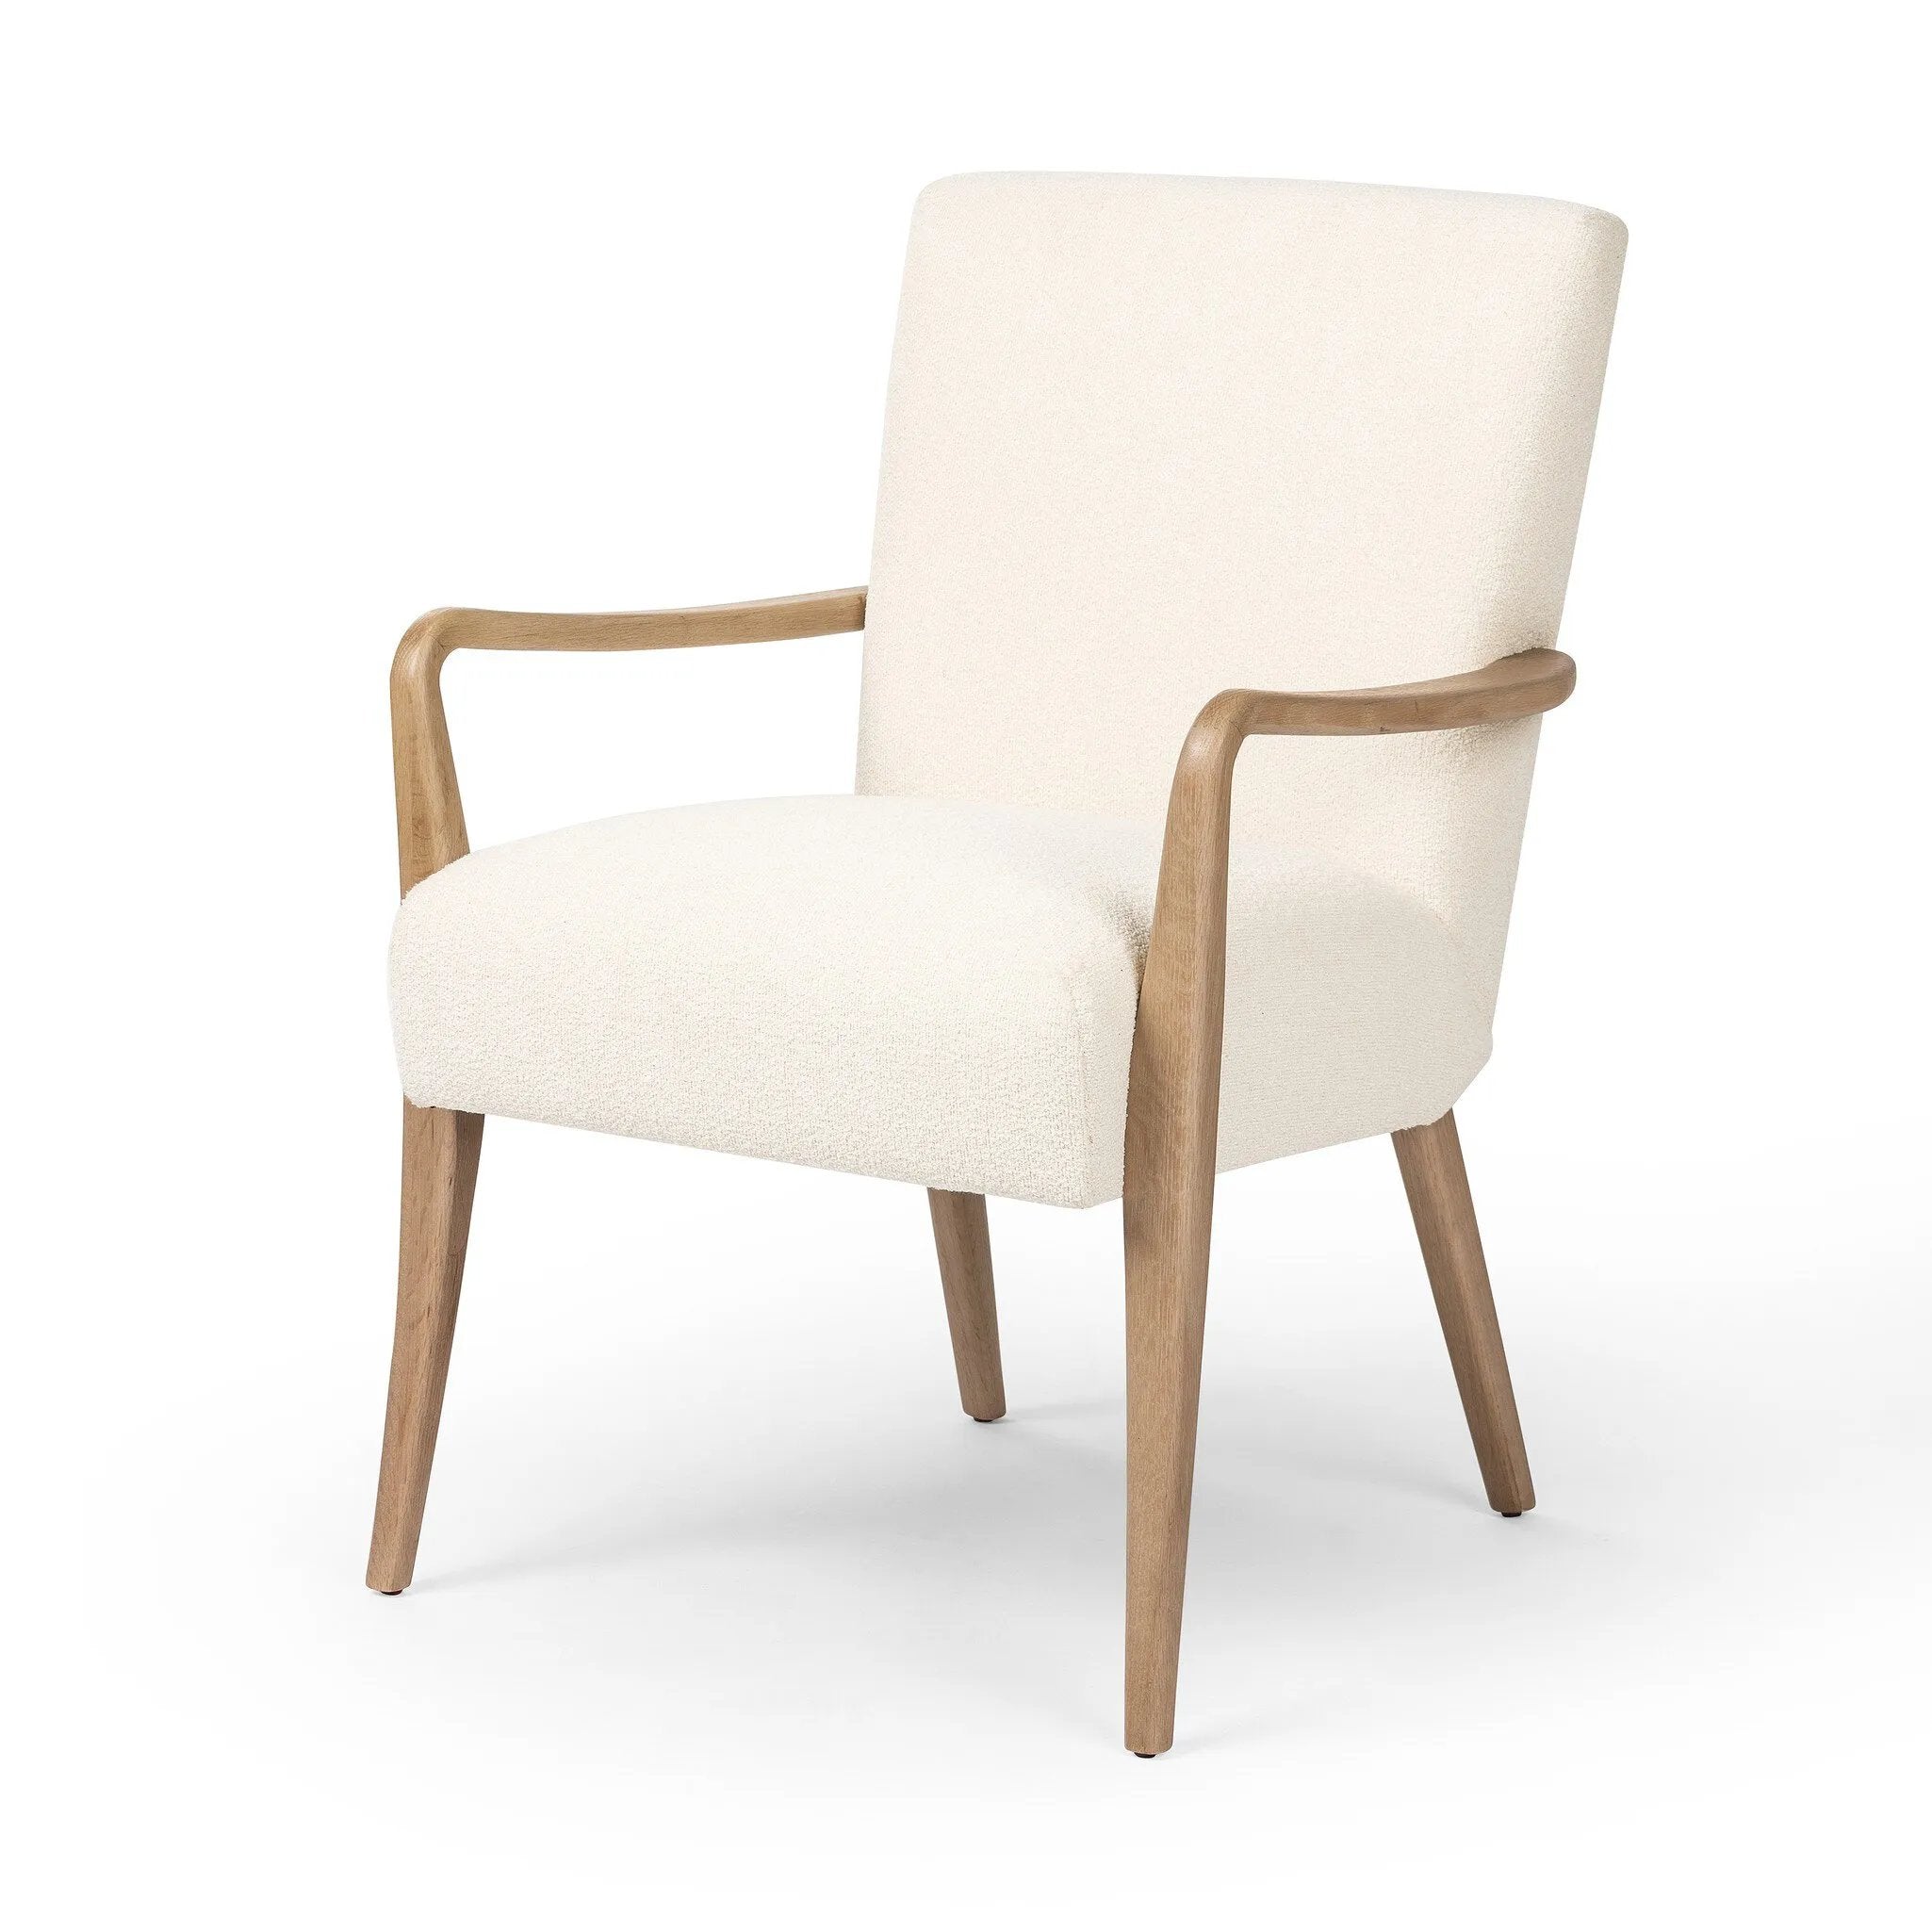 Add timeless midcentury design to your table with this Danish-inspired dining chair. Fluid oak arms and cream upholstery create a chair that embodies both comfort and style.Collection: Ashfor Amethyst Home provides interior design, new home construction design consulting, vintage area rugs, and lighting in the Nashville metro area.